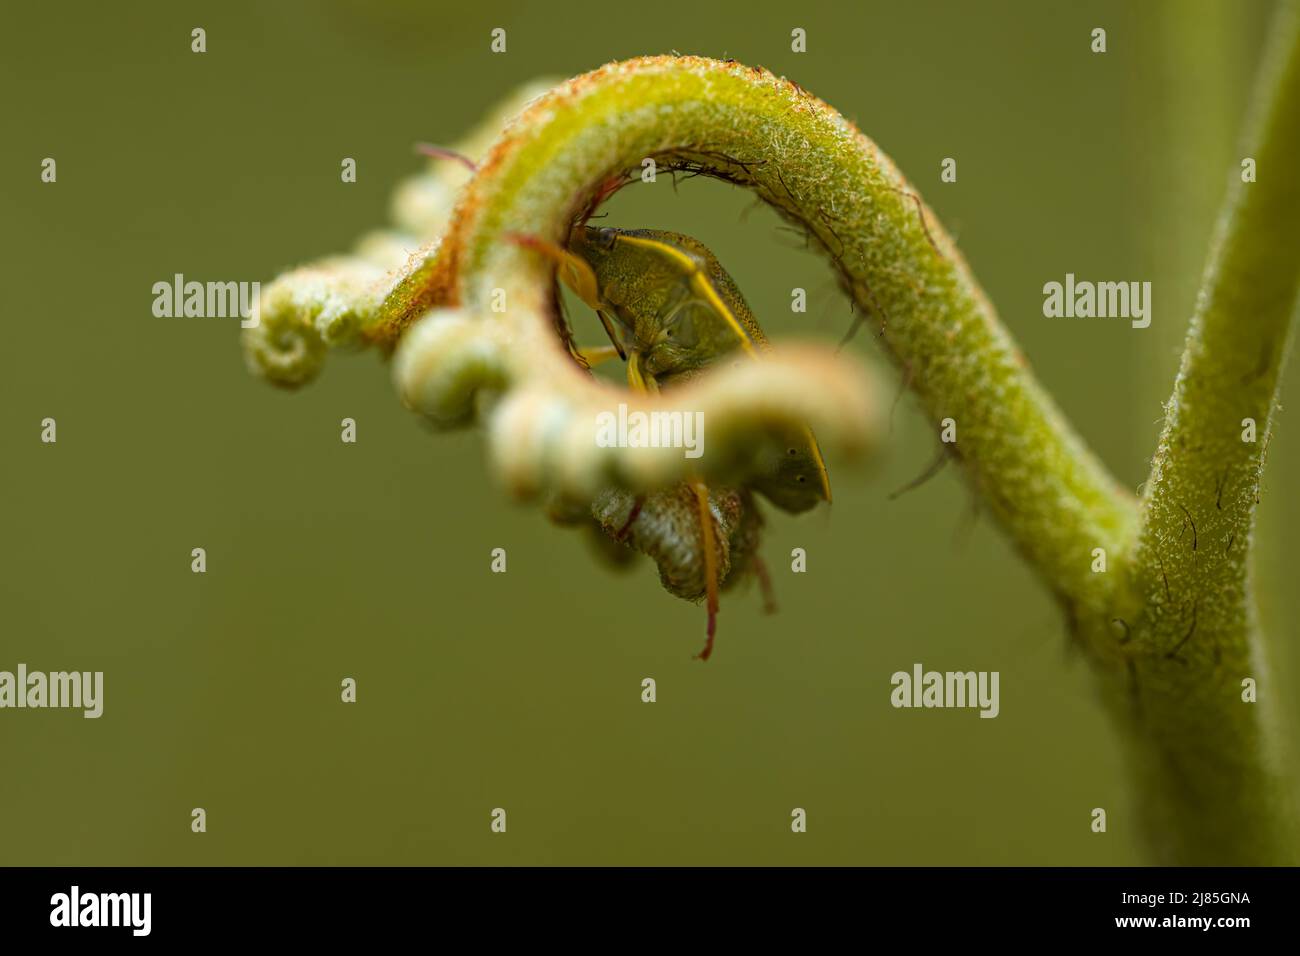 shield bug at dawn hiding in the curls of the fern. macro photography. wild animal life of the forests. nature photography. Stock Photo